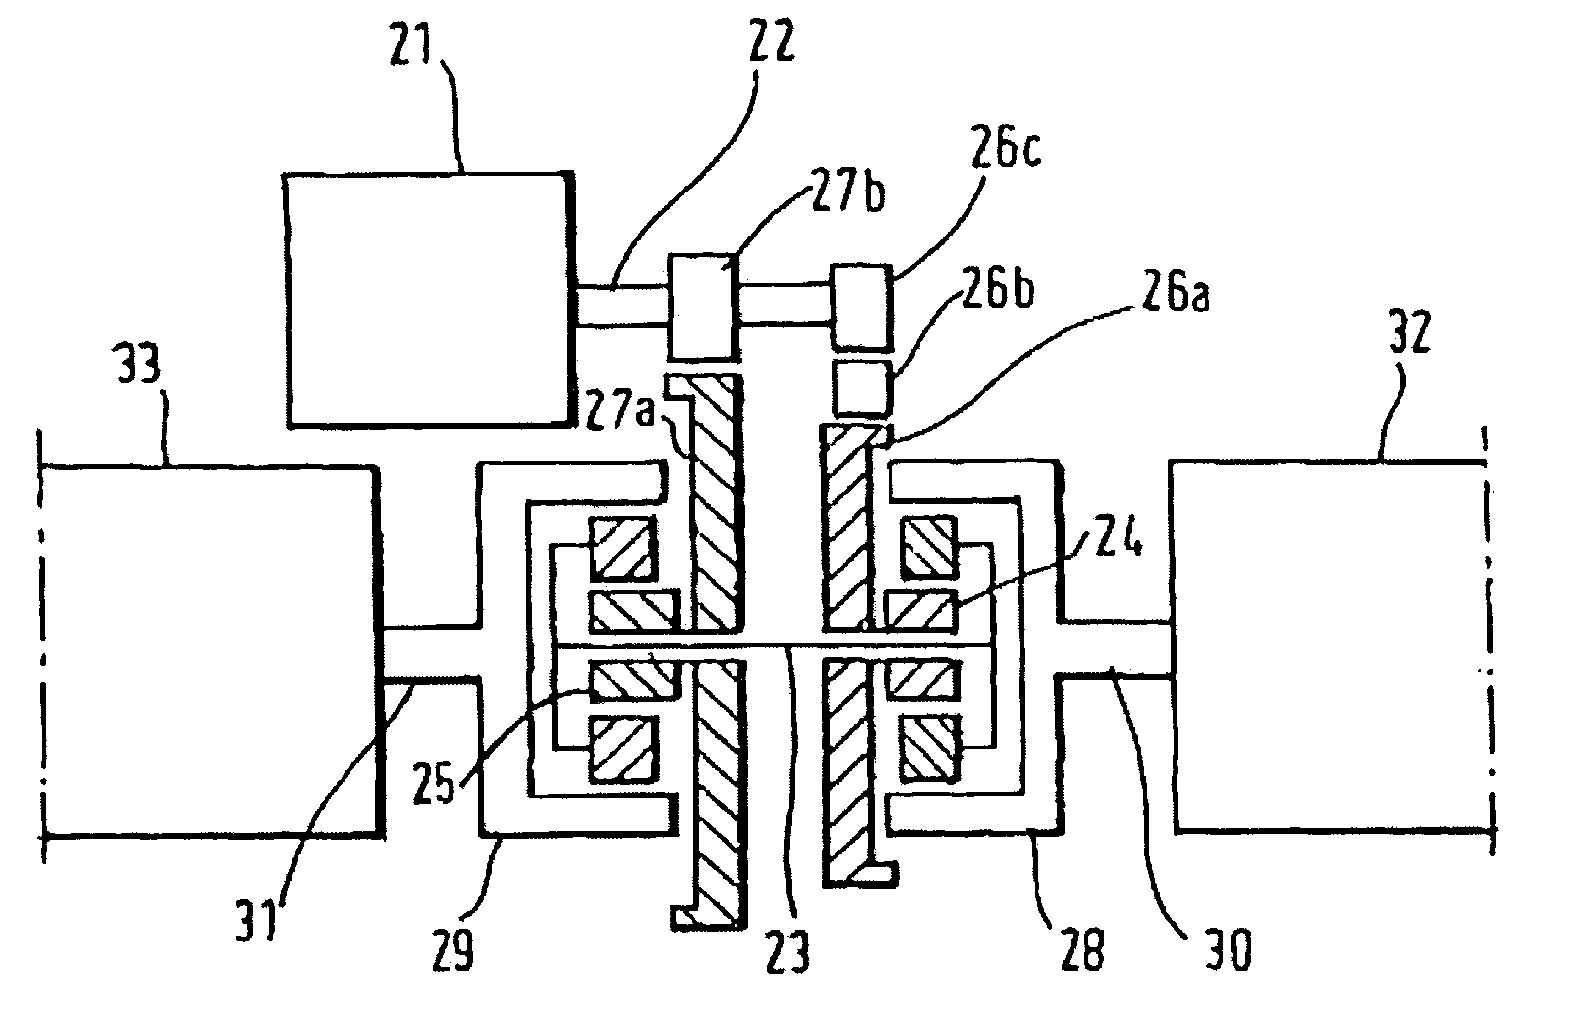 Drive configuration for a skid steered vehicle